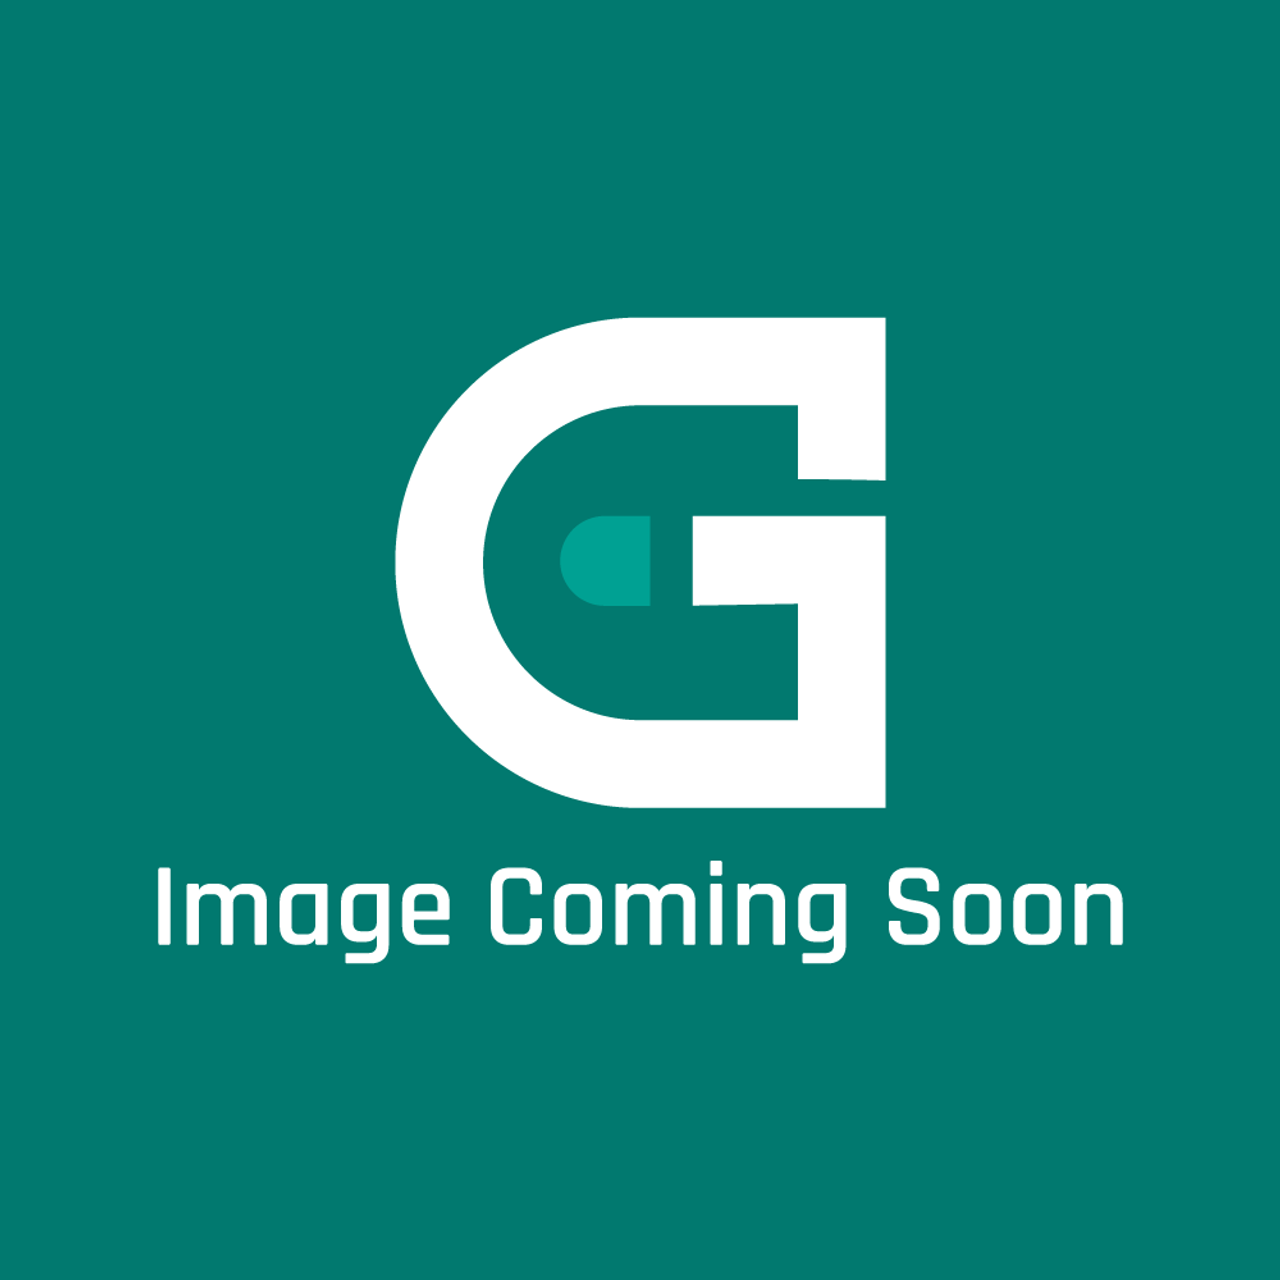 AGA Marvel SAG-A036623-0734 - Lh Port Hole Outer Door Panel-Crea - Image Coming Soon!